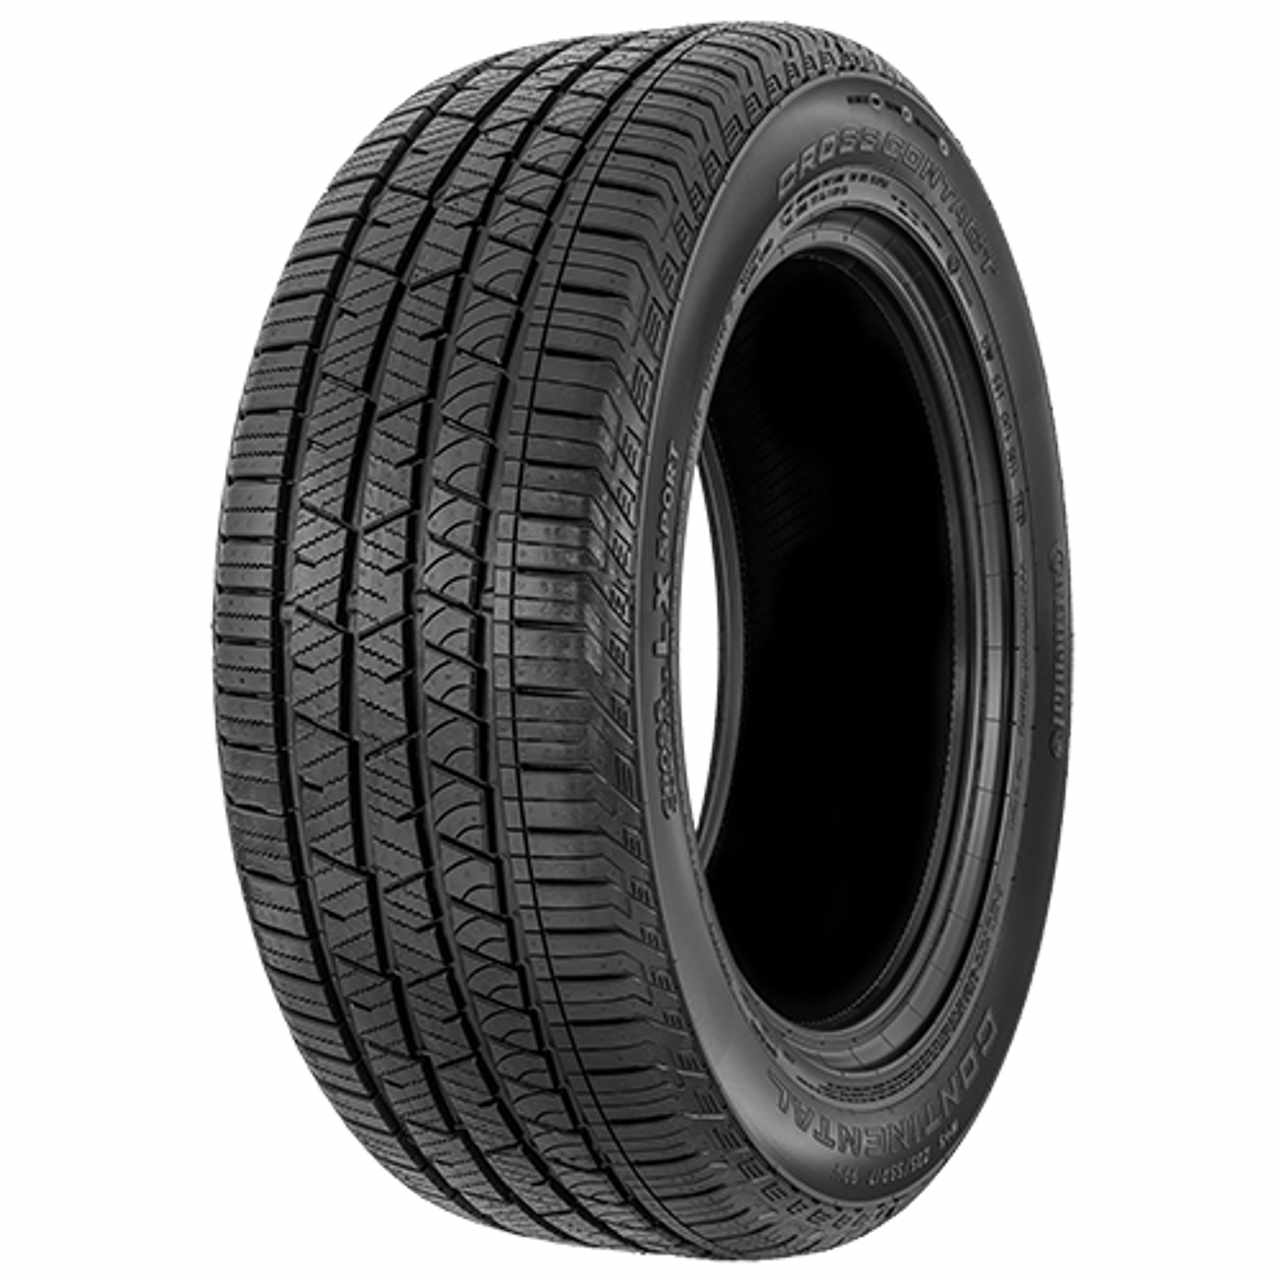 CONTINENTAL CROSSCONTACT LX SPORT (EVc) 215/65R16 98H BSW